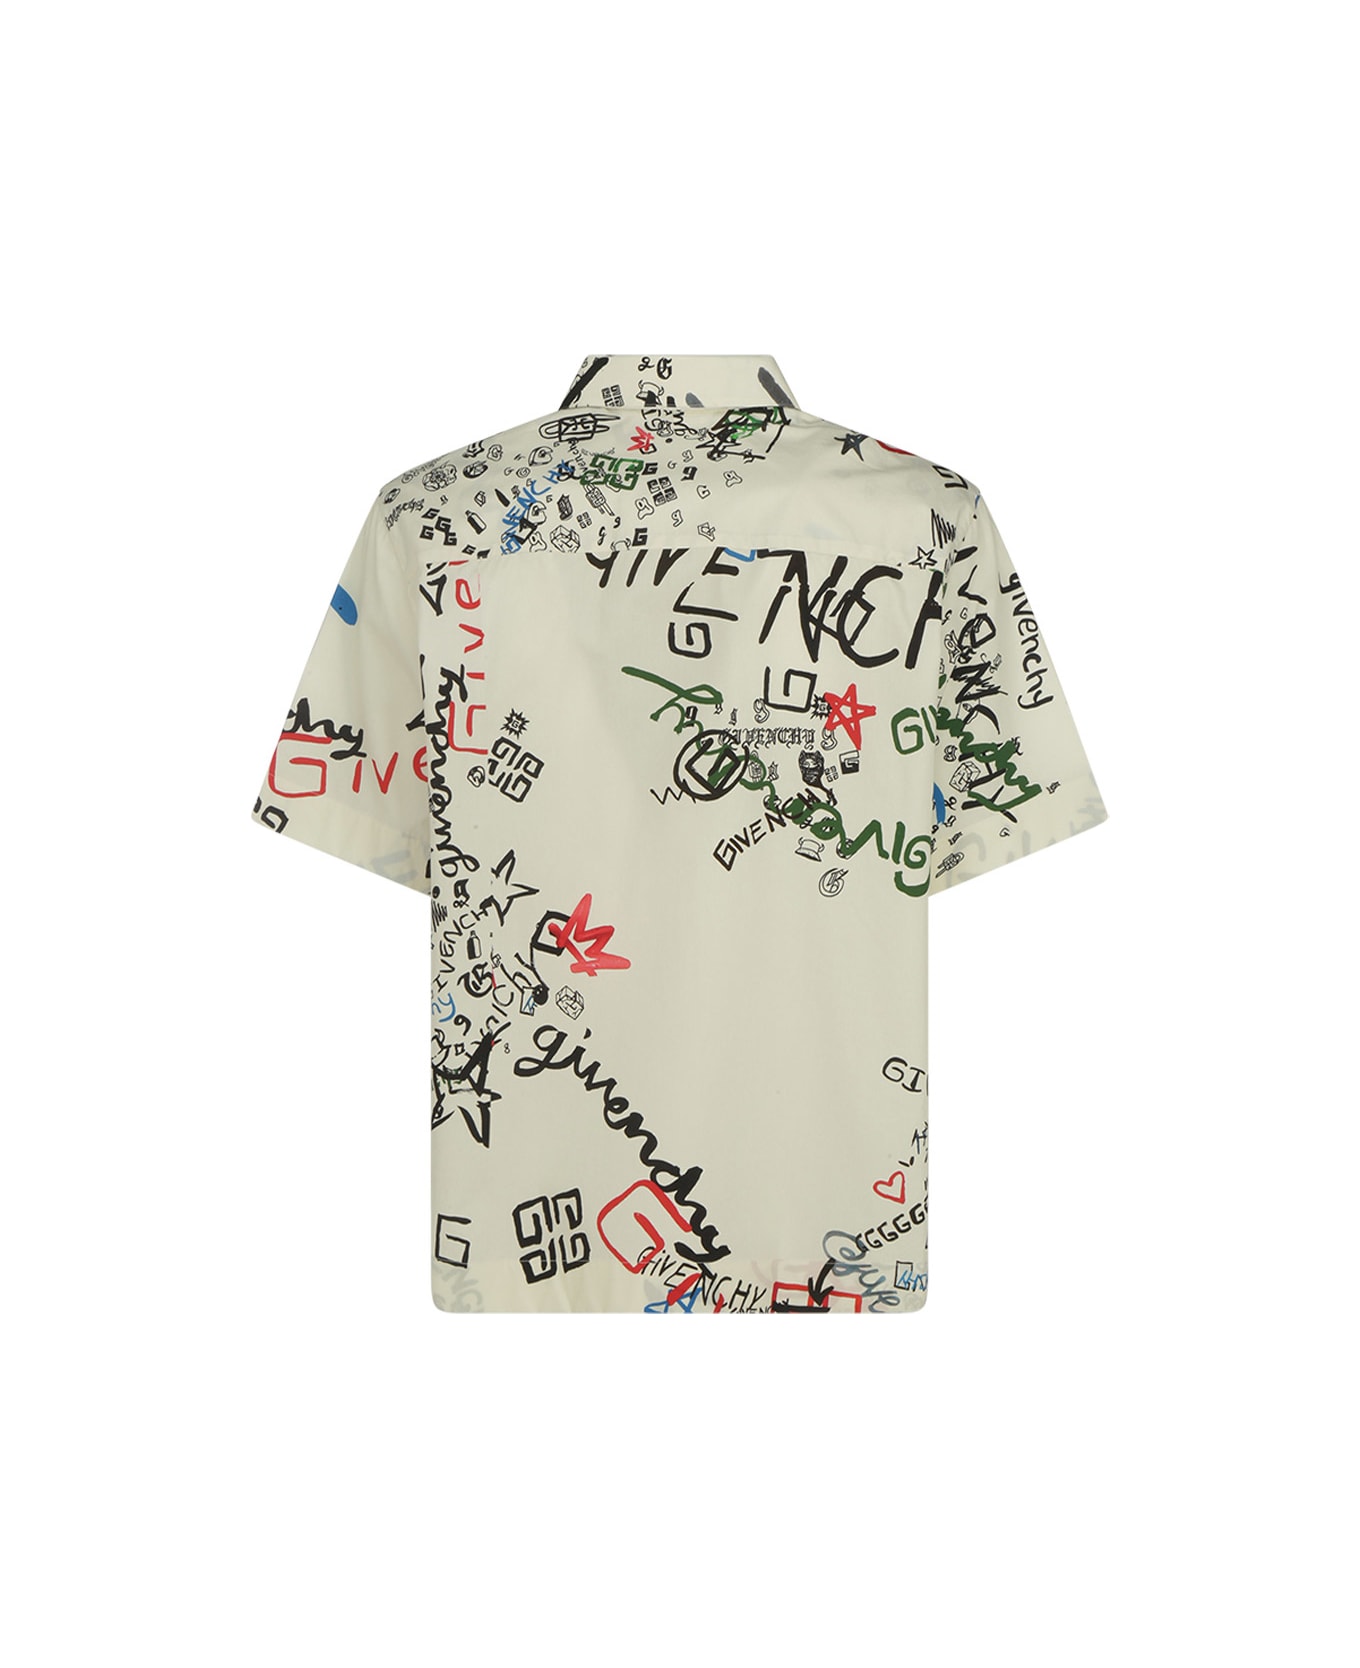 Givenchy Shirt - Multicolored